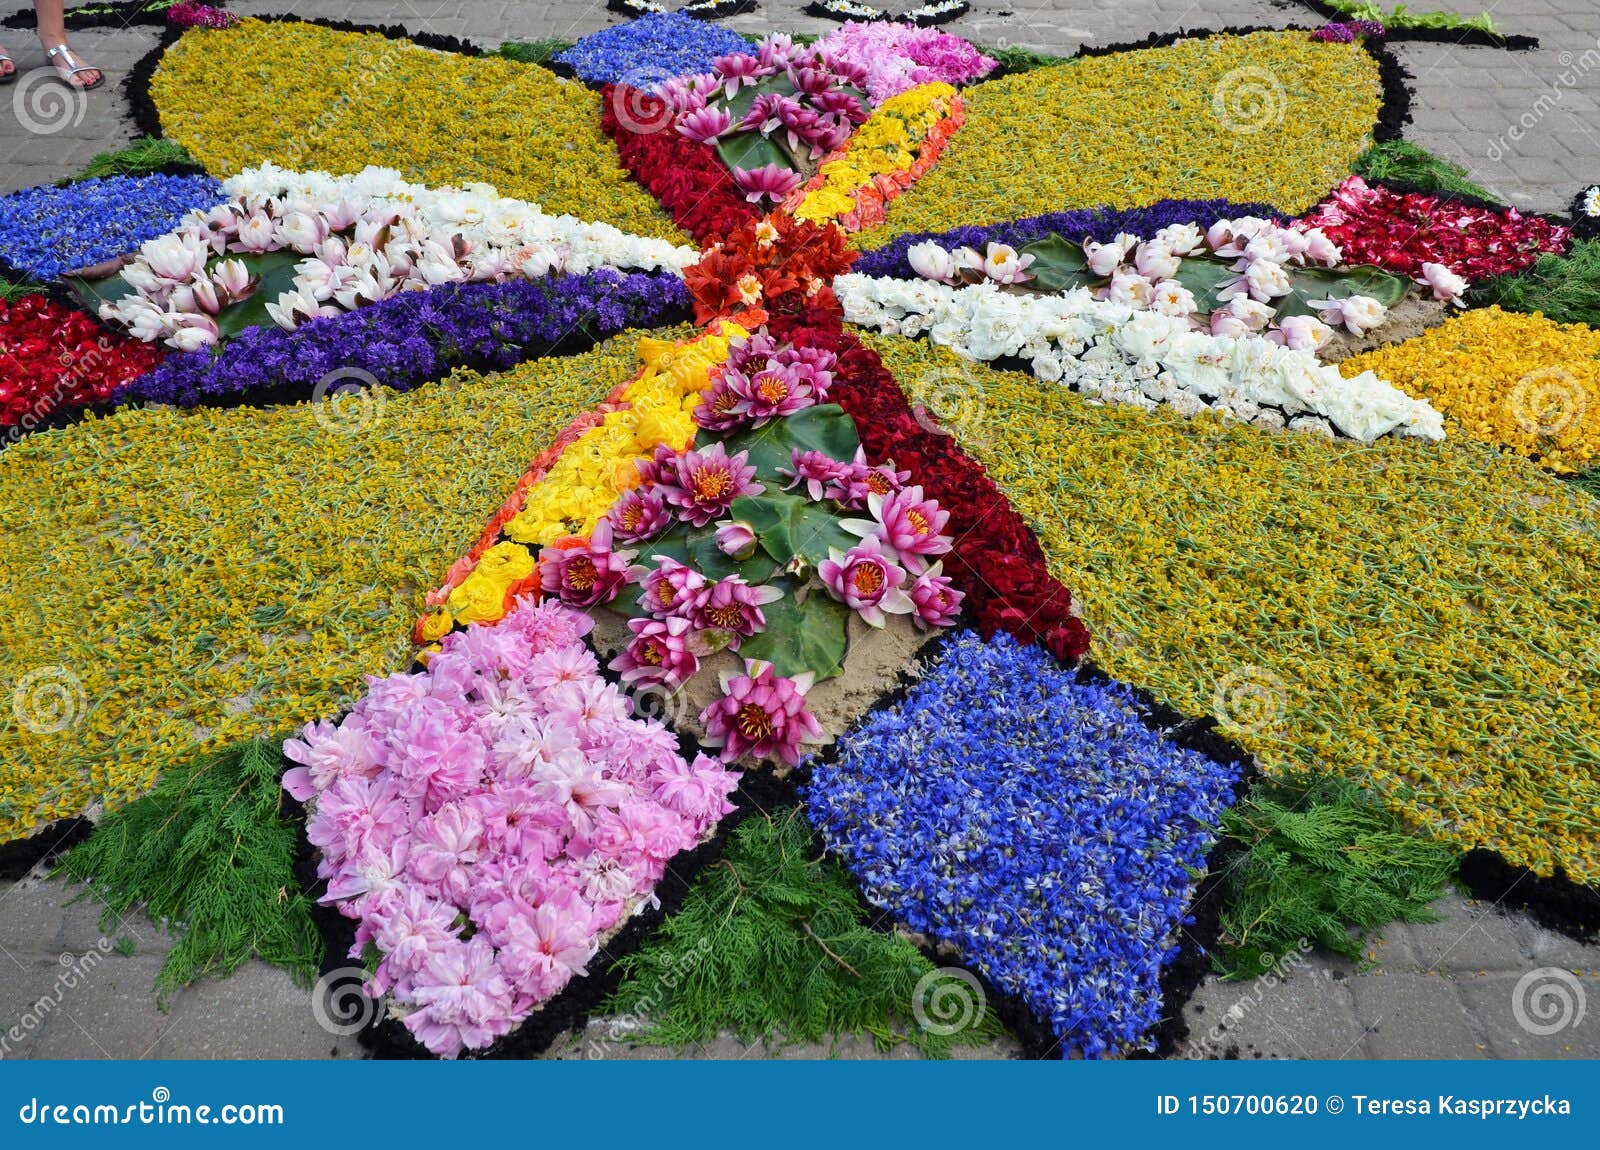 Traditional Flower Carpets In Spycimierz In Corpus Christi Day